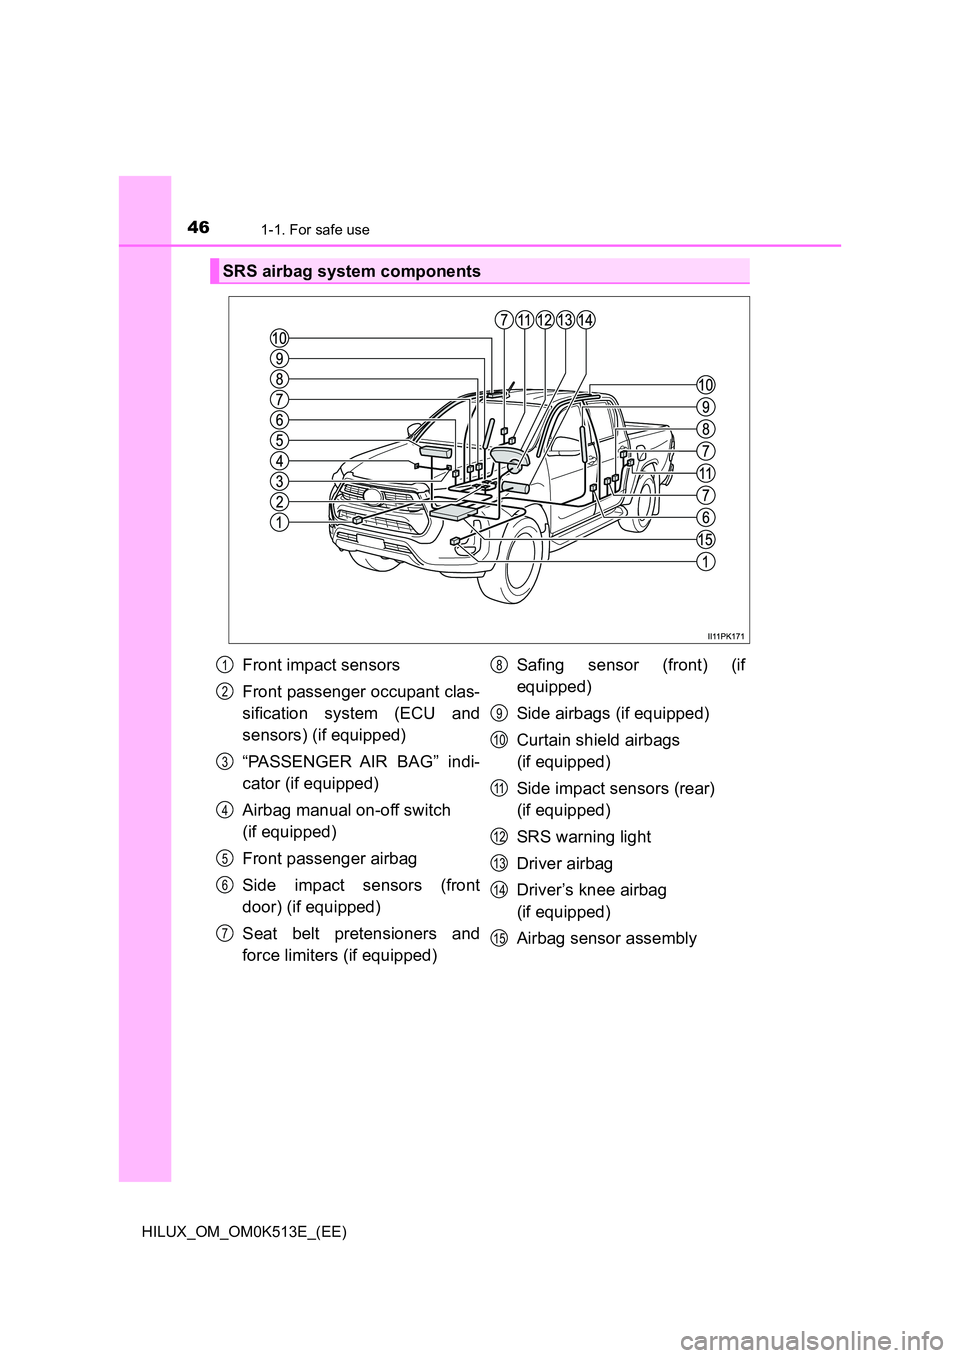 TOYOTA HILUX 2021  Owners Manual (in English) 461-1. For safe use
HILUX_OM_OM0K513E_(EE)
SRS airbag system components
Front impact sensors 
Front passenger occupant clas- 
sification system (ECU and 
sensors) (if equipped) 
“PASSENGER AIR BAG�